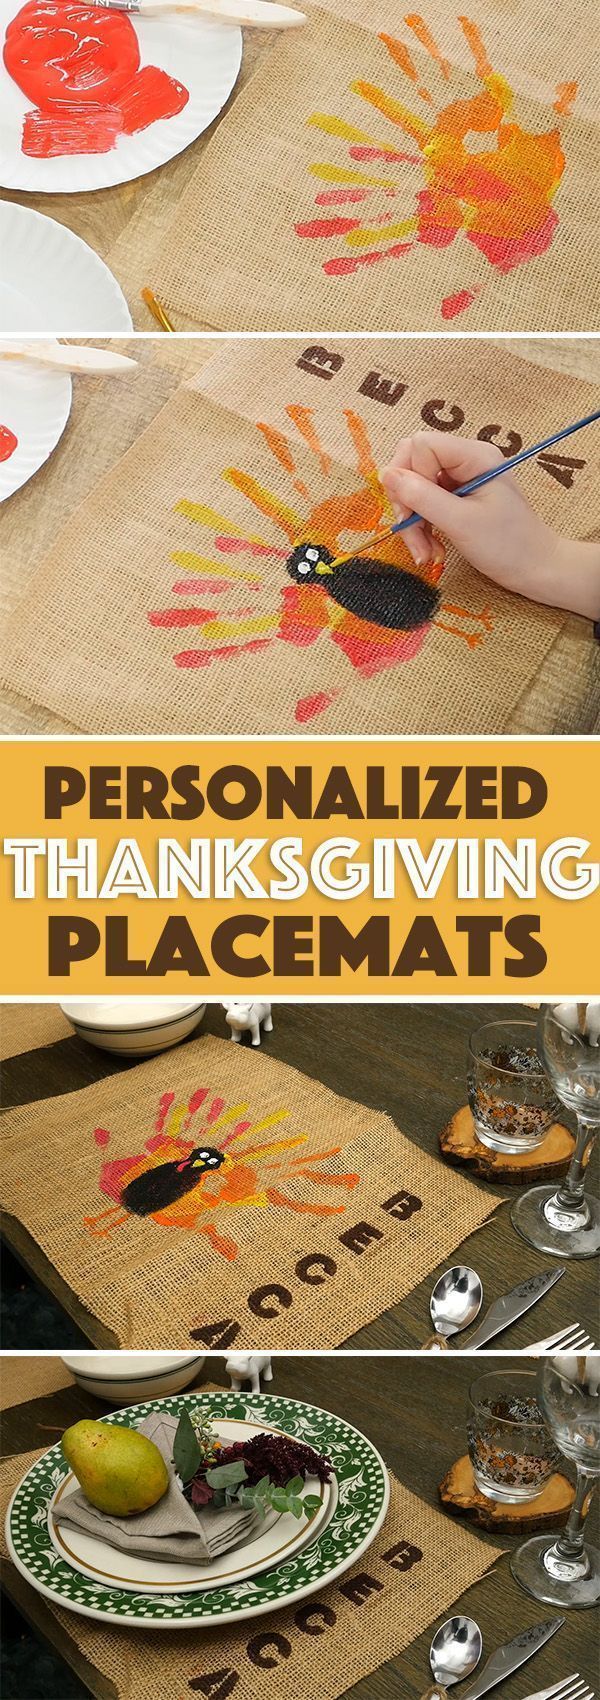 She Paints Her Hand Orange For One Clever Reason. Such A Great Thanksgiving Idea! -   17 diy thanksgiving centerpieces for kids ideas